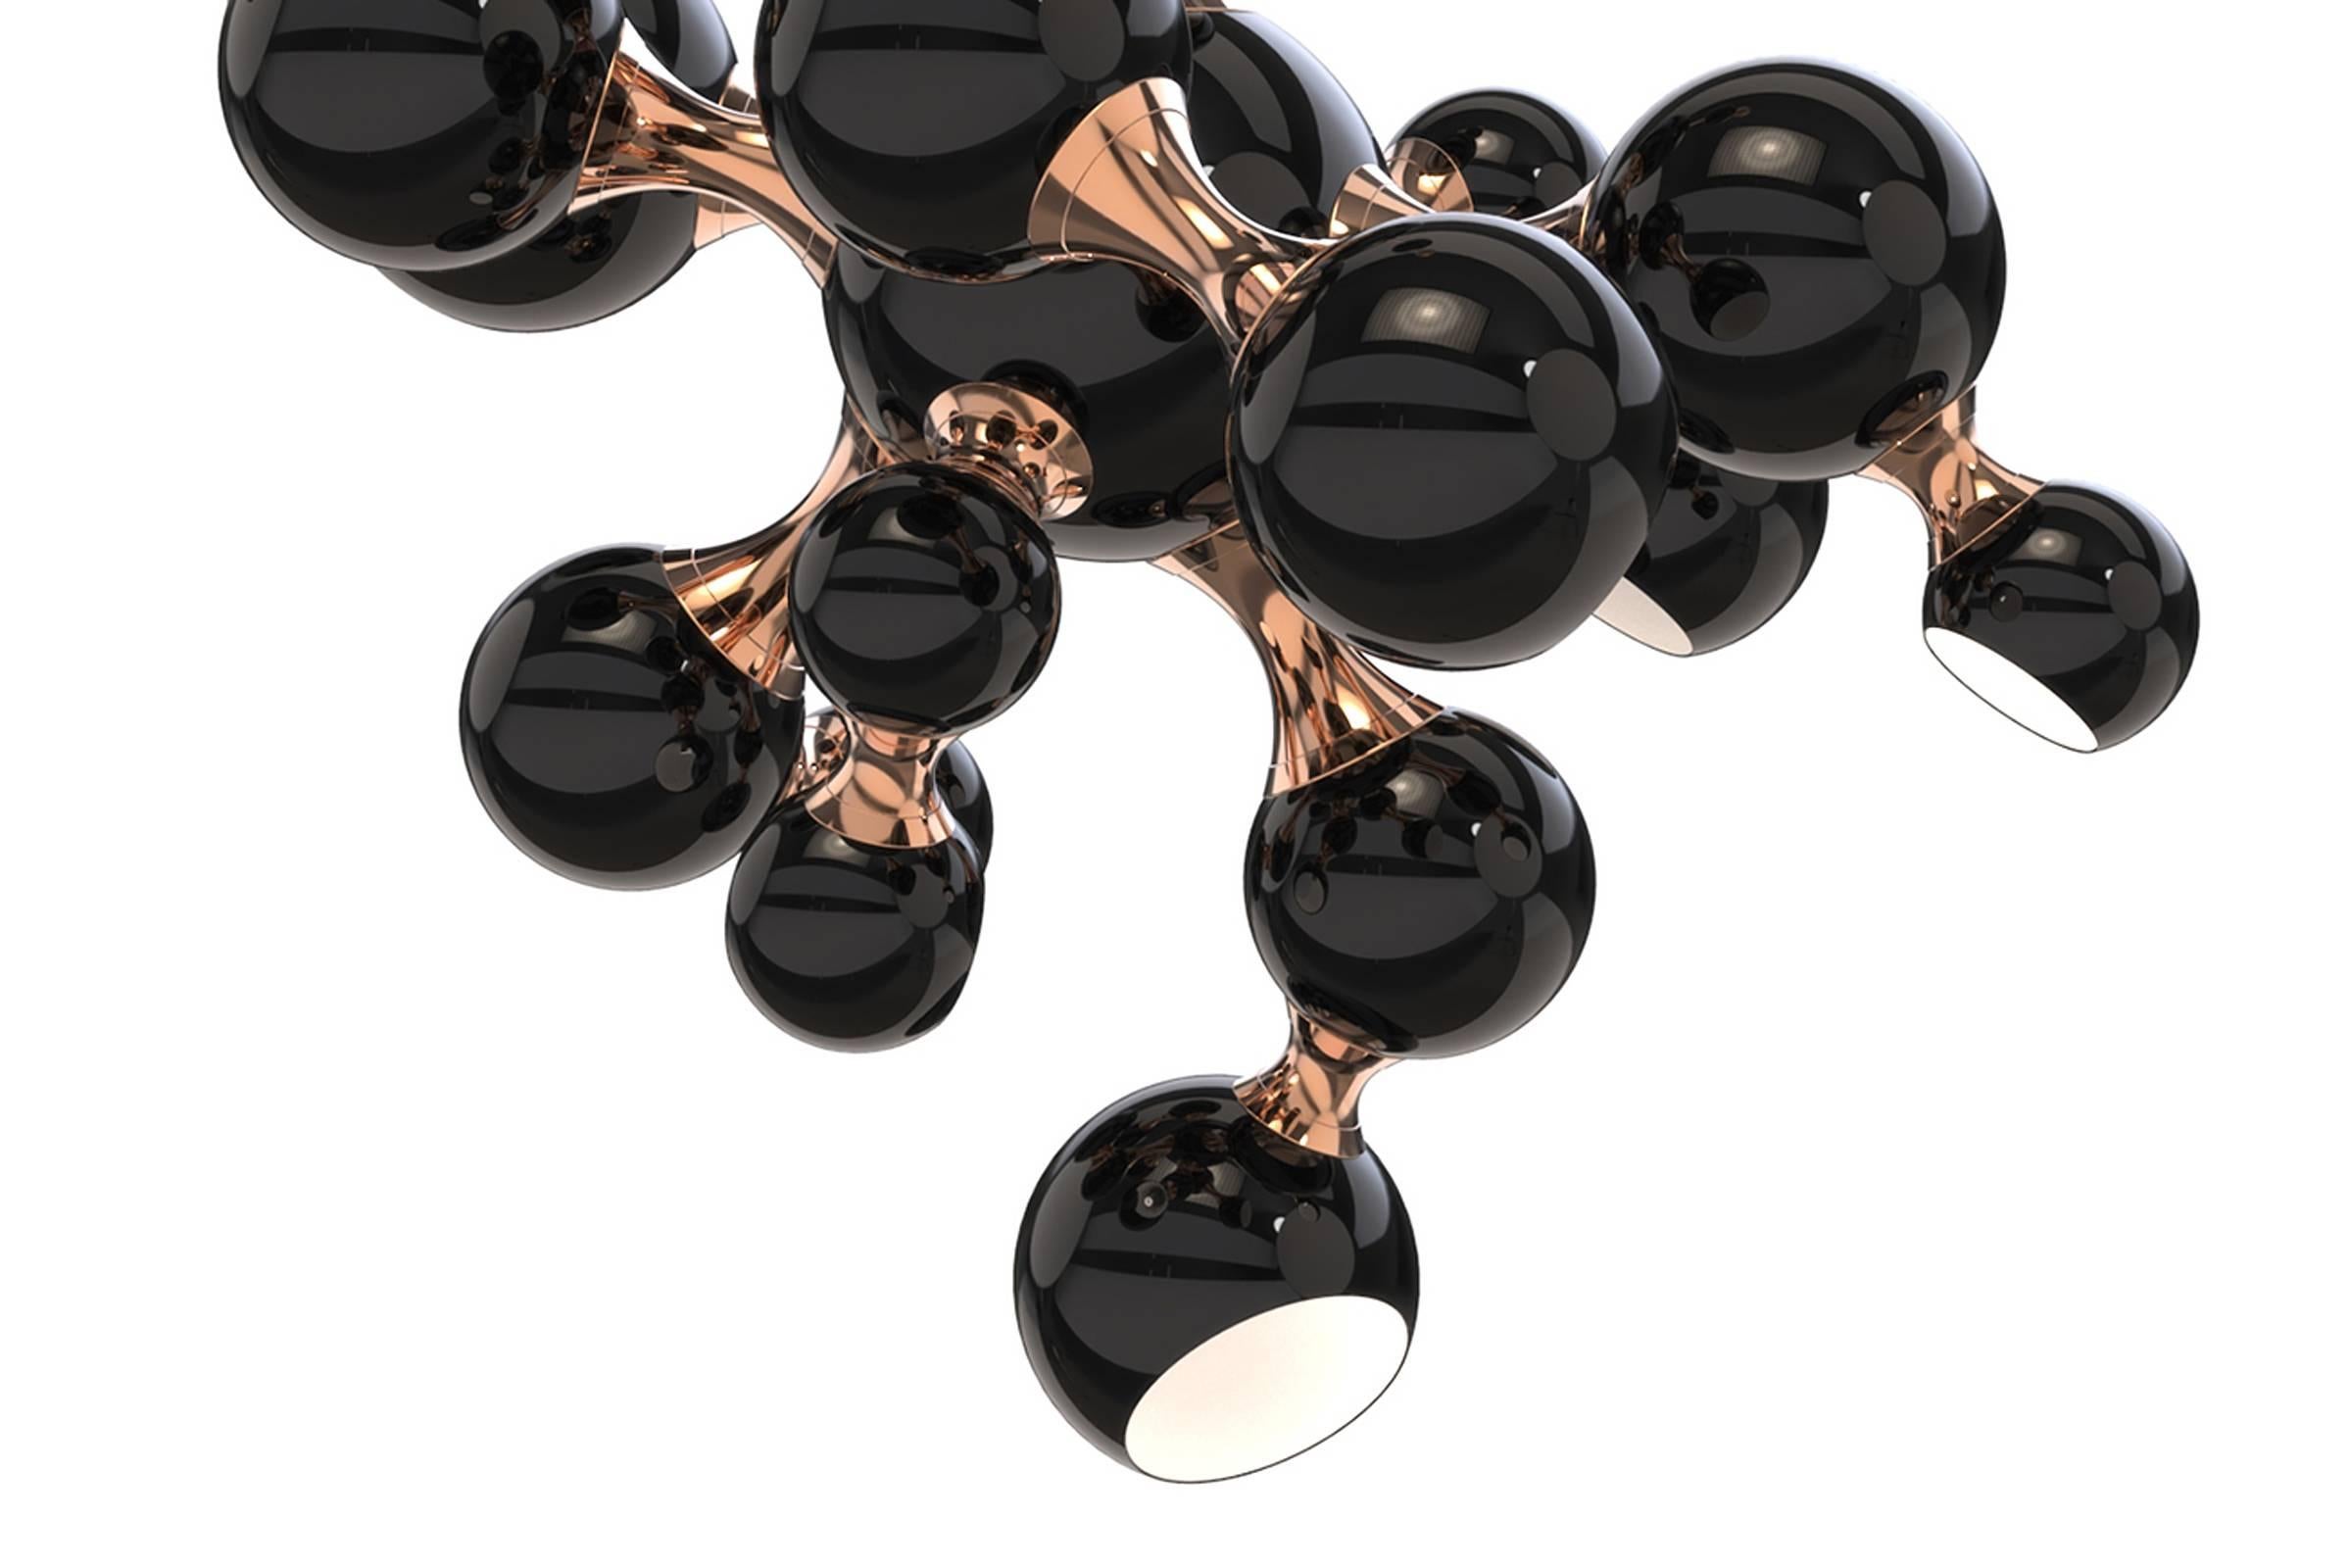 Chandelier black pearl with aluminium and brass structure
in copper finish with glossy black globes.
Shades in glossy black and gold powder paint inside.
8 x G9 bulbs included.
Also available in with aluminium and brass structure
in gold plaetd